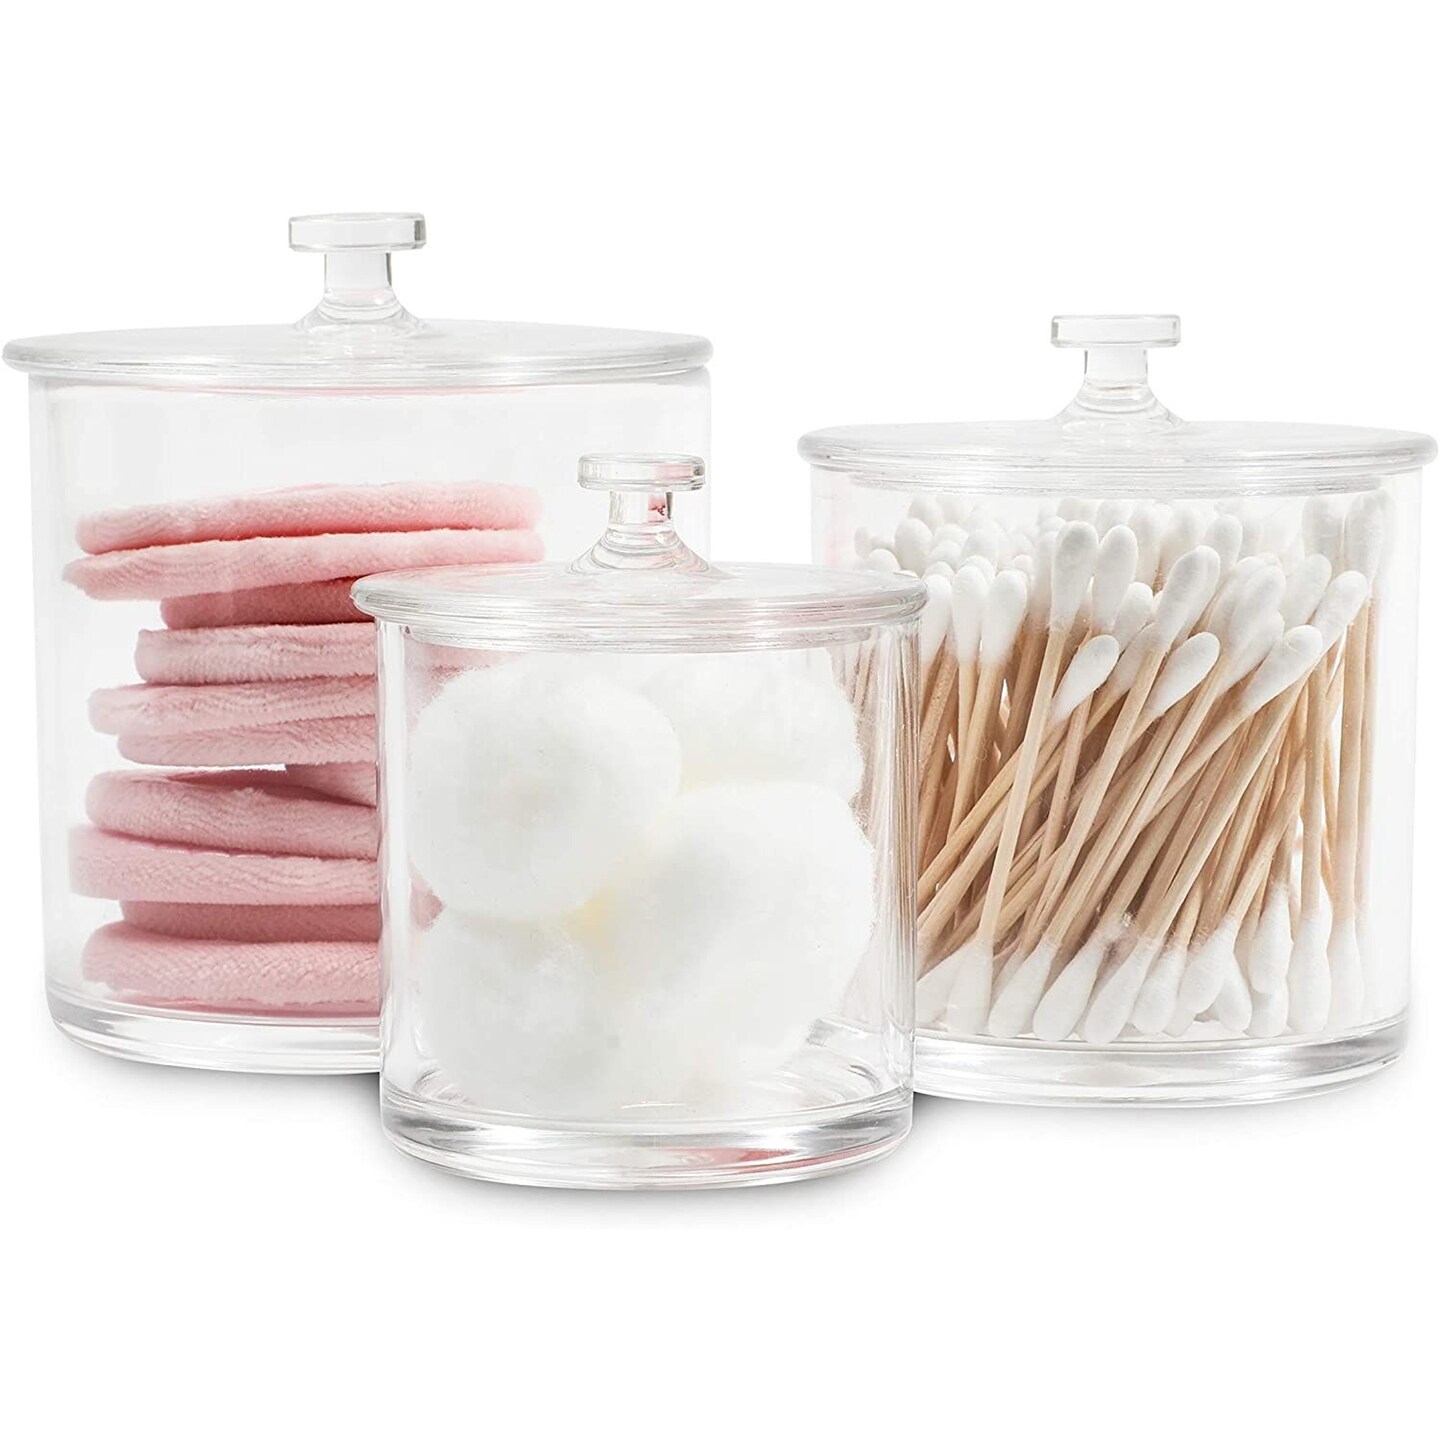 Plastic Candy Jar - Apothecary X-Large